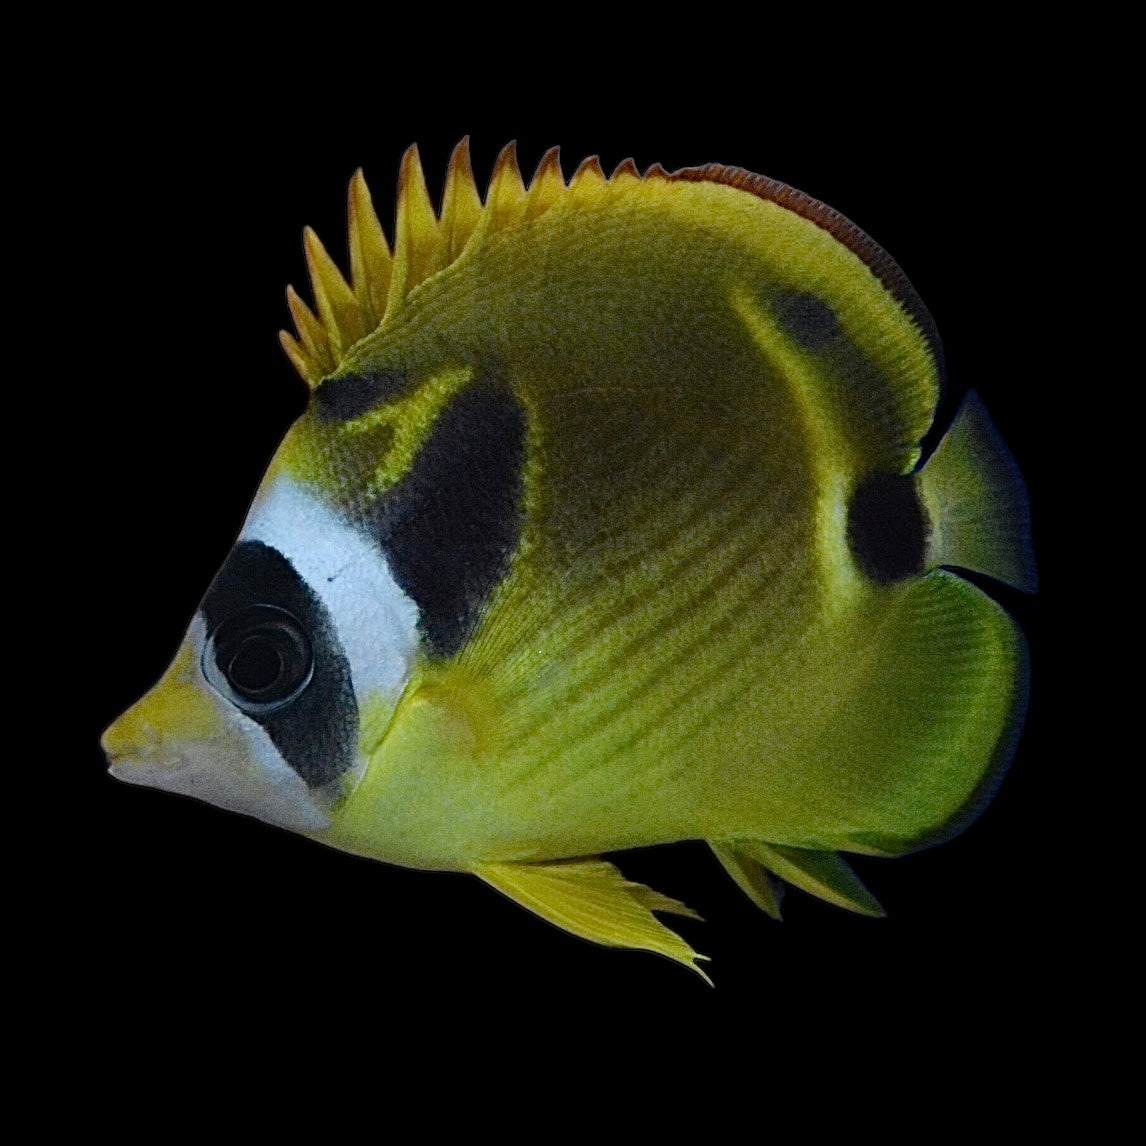 Aquarium Conditioned-Racoon Butterflyfish